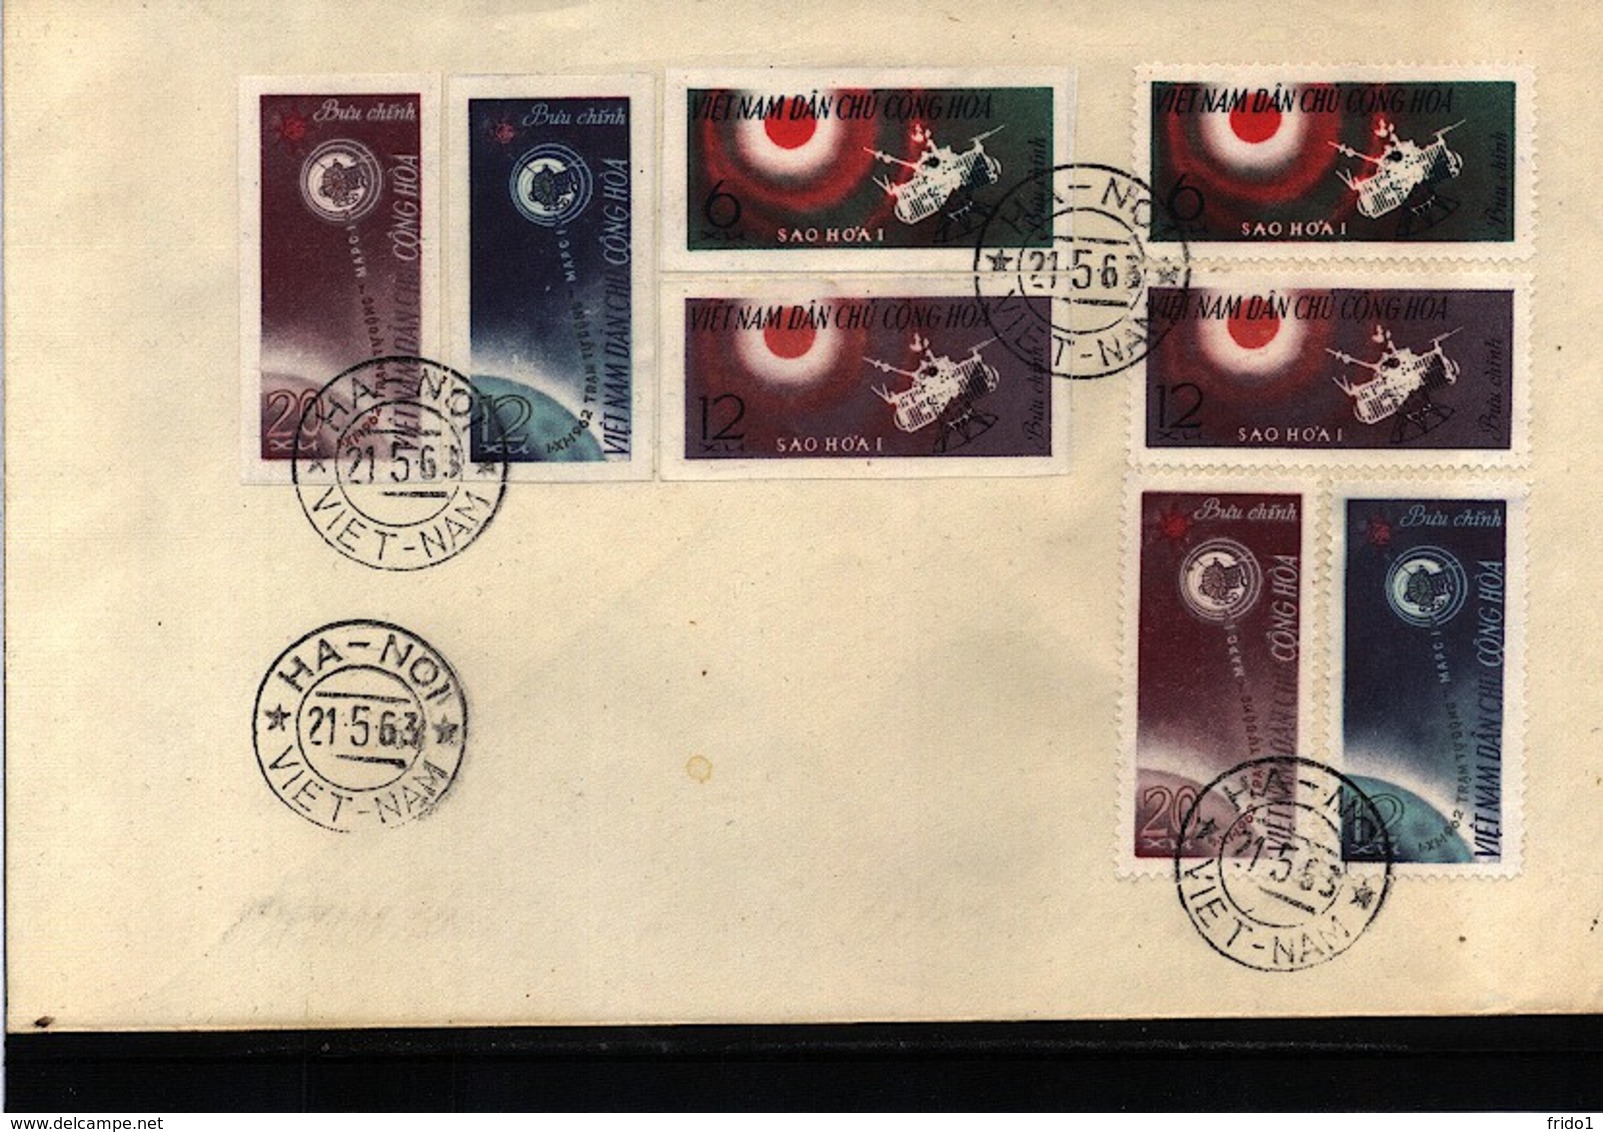 Vietnam 1963 Space / Raumfahrt FDC Perforated + Imperforated Set Interesting Cover - Asien